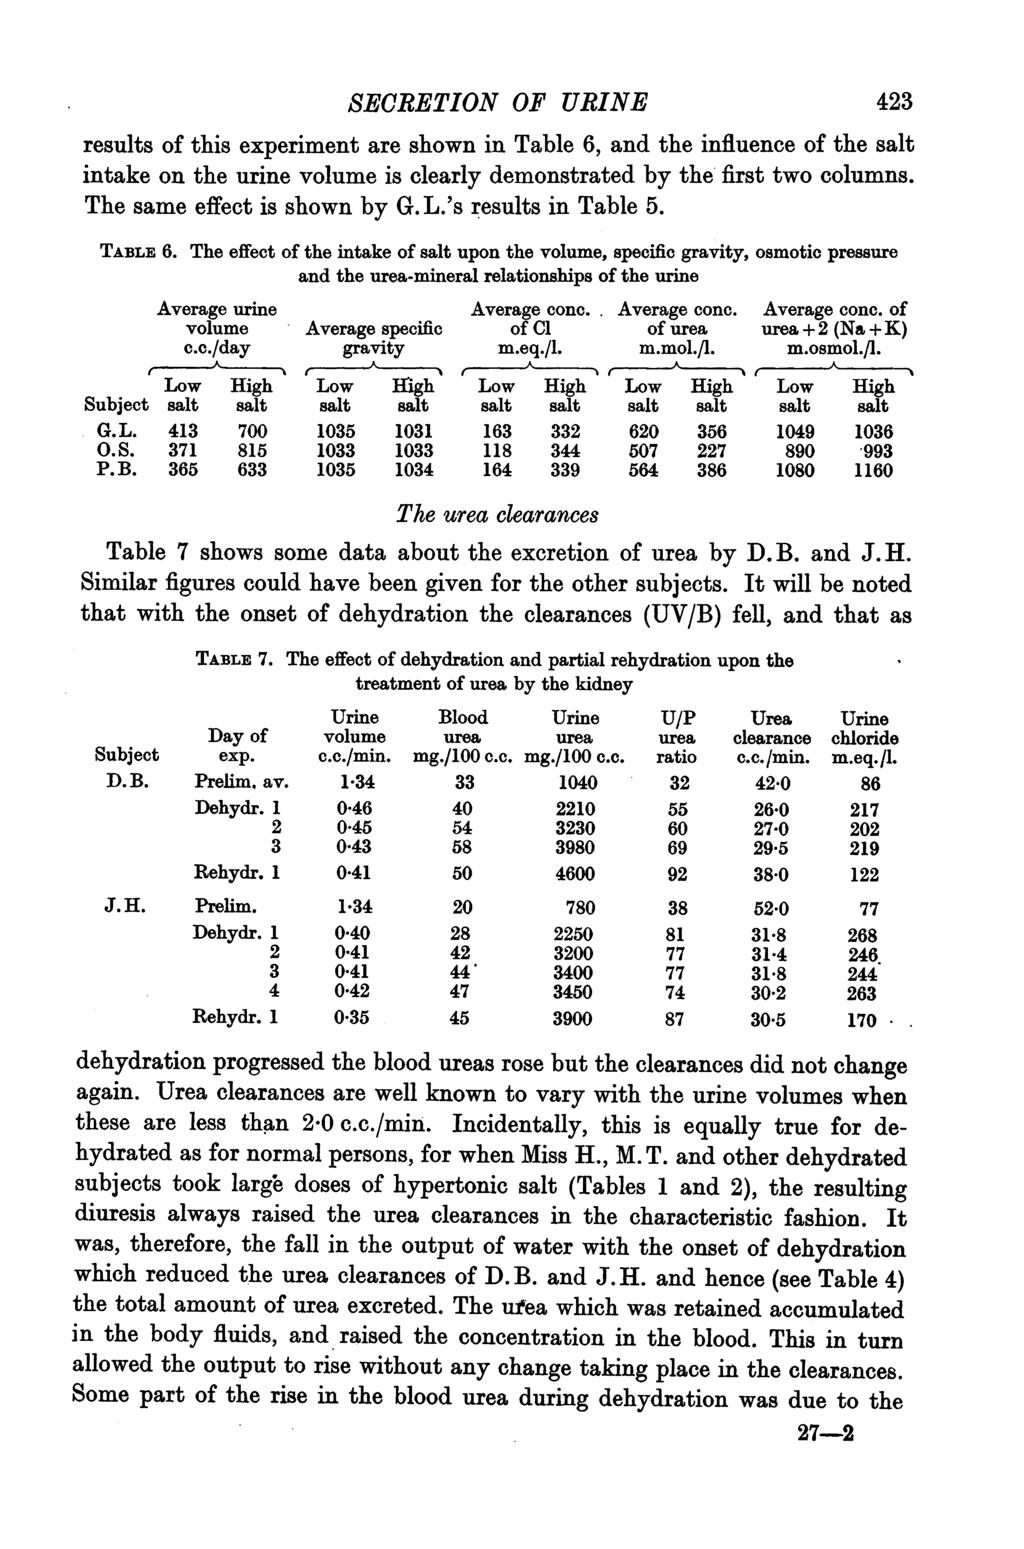 SECRETION OF URINE 423 results of this experiment are shown in Table 6, and the influence of the salt intake on the urine volume is clearly demonstrated by the first two columns.